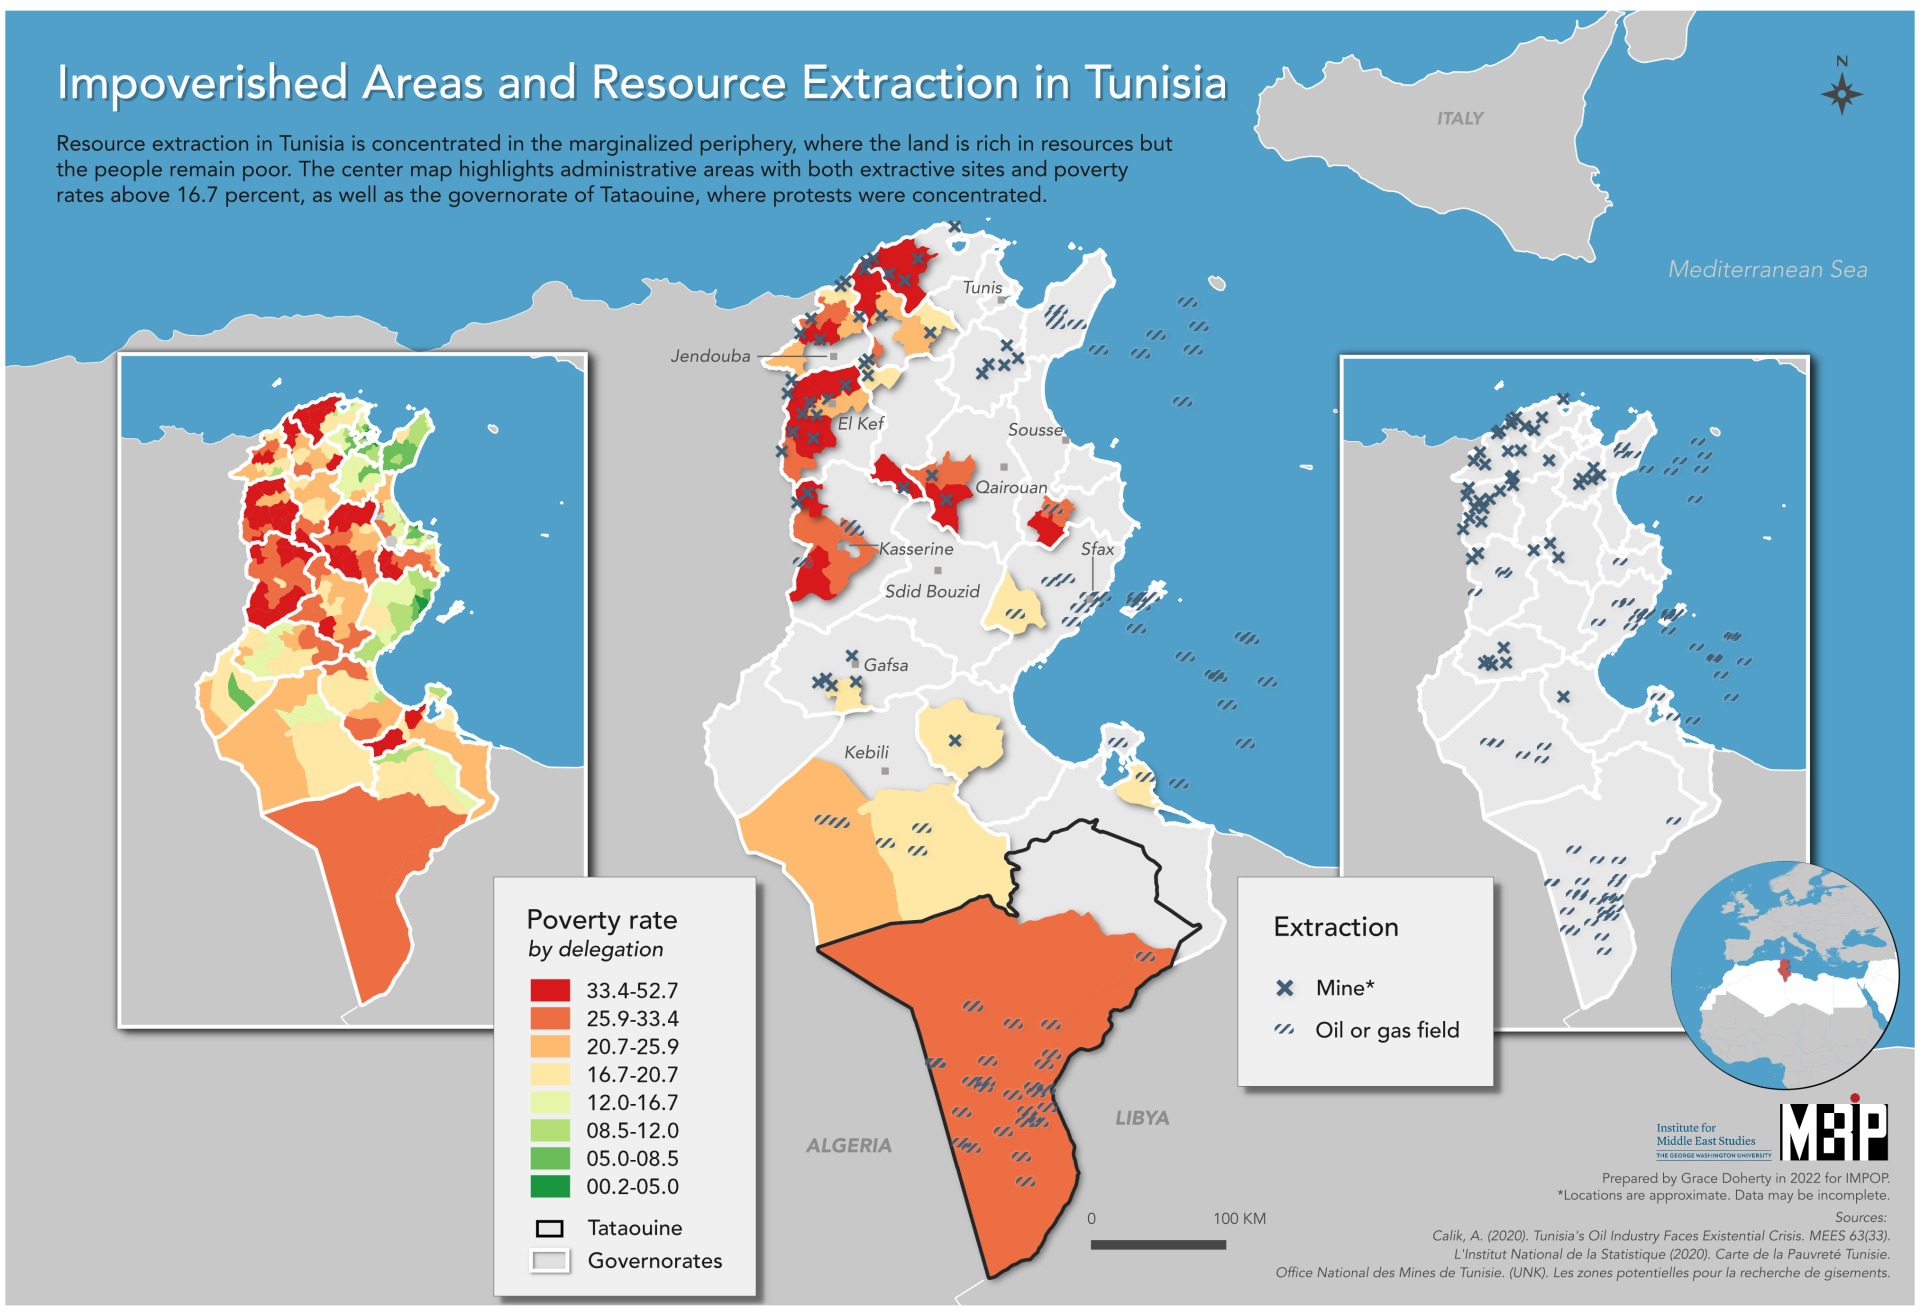 Maping showing resource extraction in Tunisia, which is concentrated in the marginalized periphery.